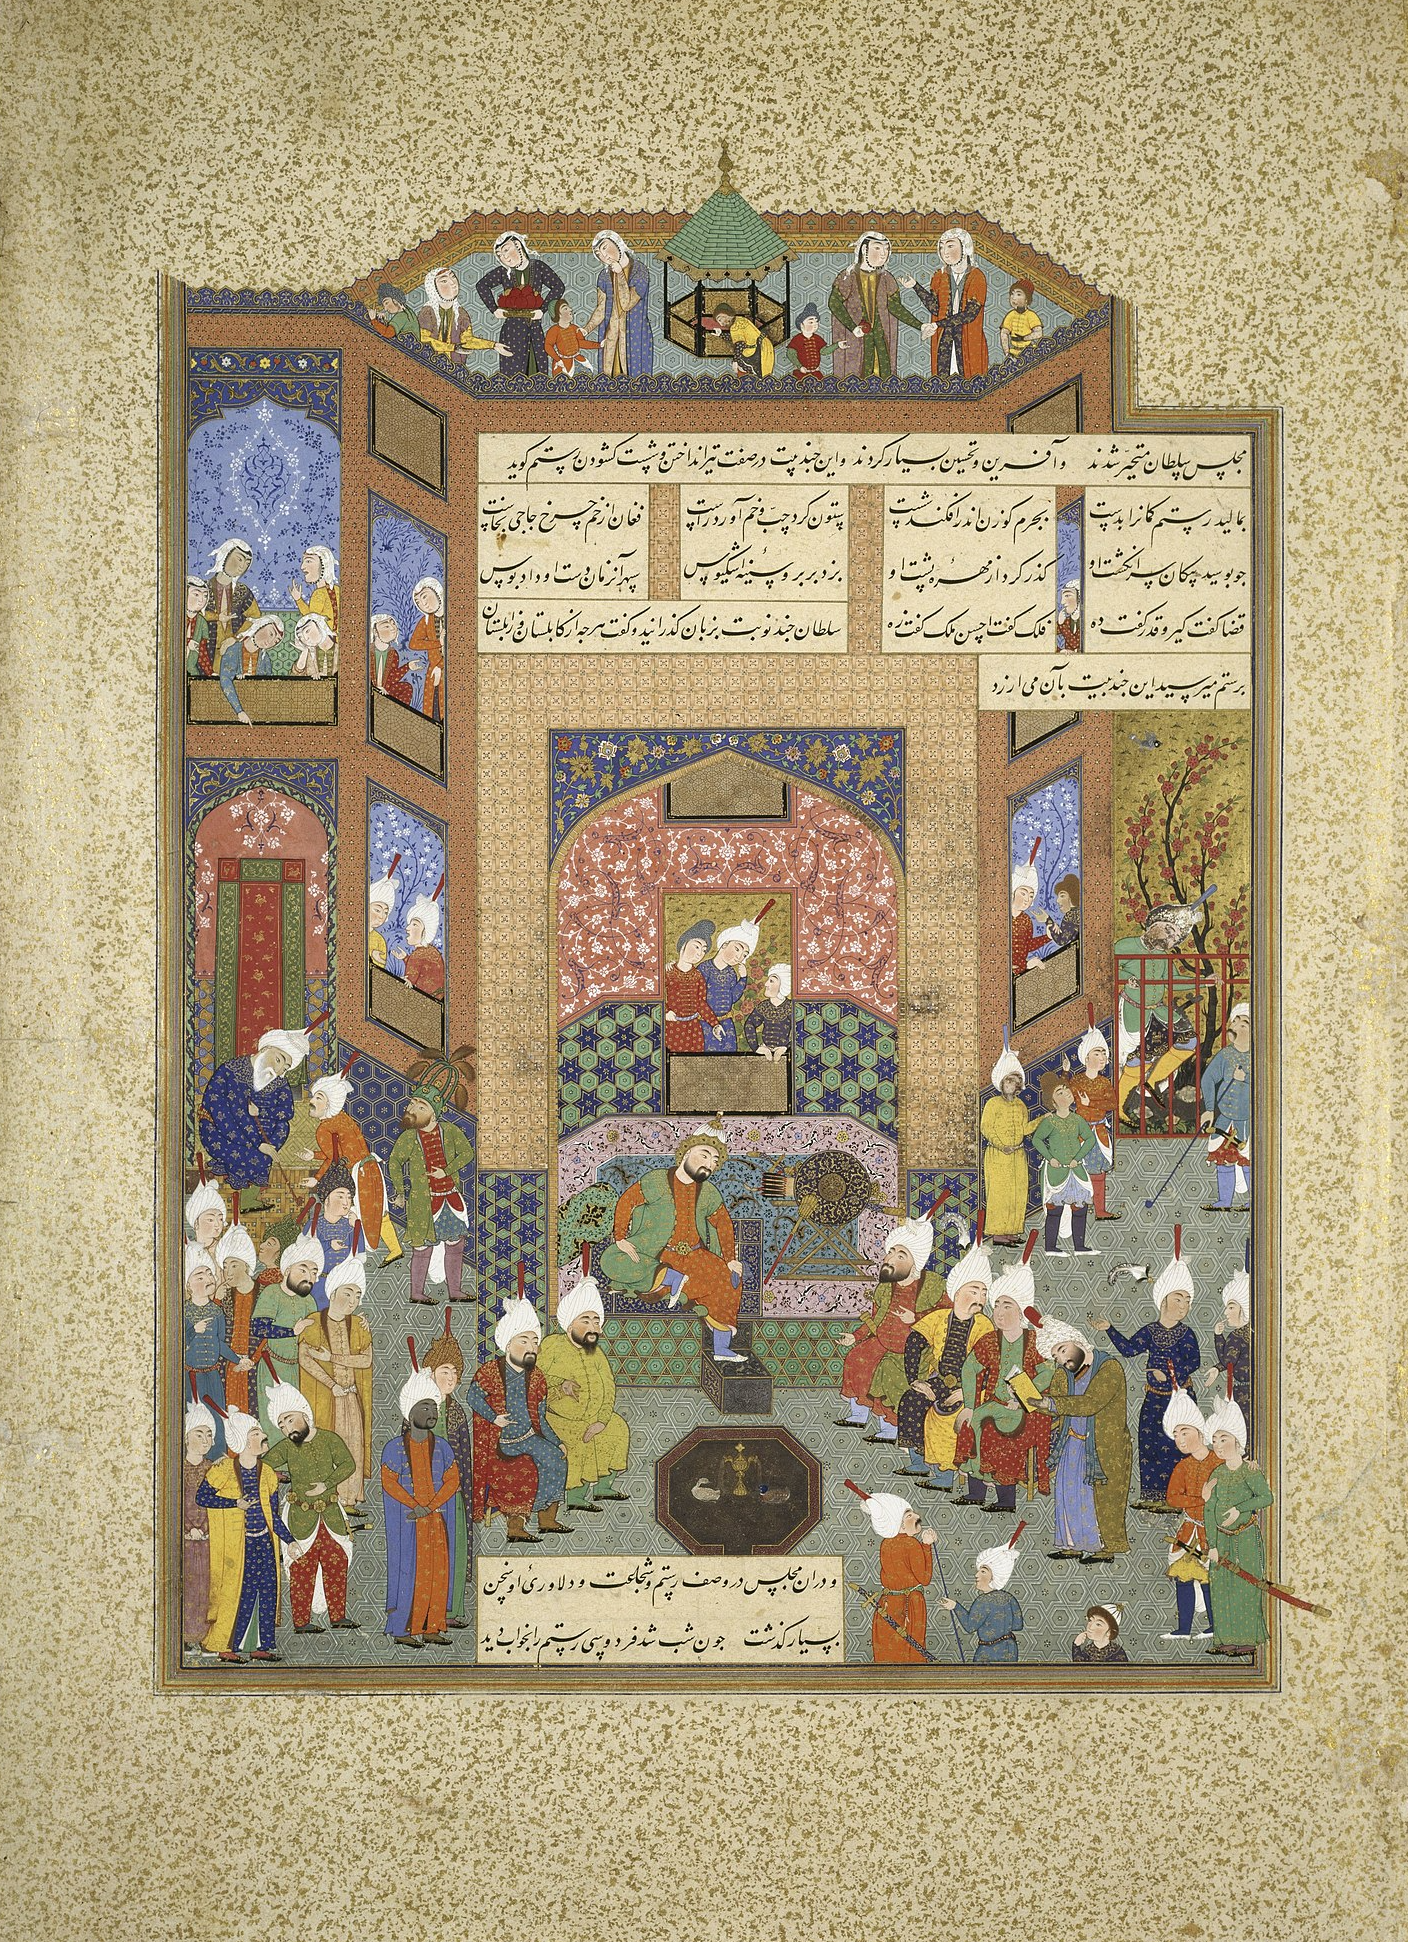 The Poet Firdausi Reciting From His Work Before the Ghaznavid Sultan Mahmud by Unknown Artist - c. 1525 - 31.8 x 47 cm Pergamonmuseum, Staatliche Museen zu Berlin